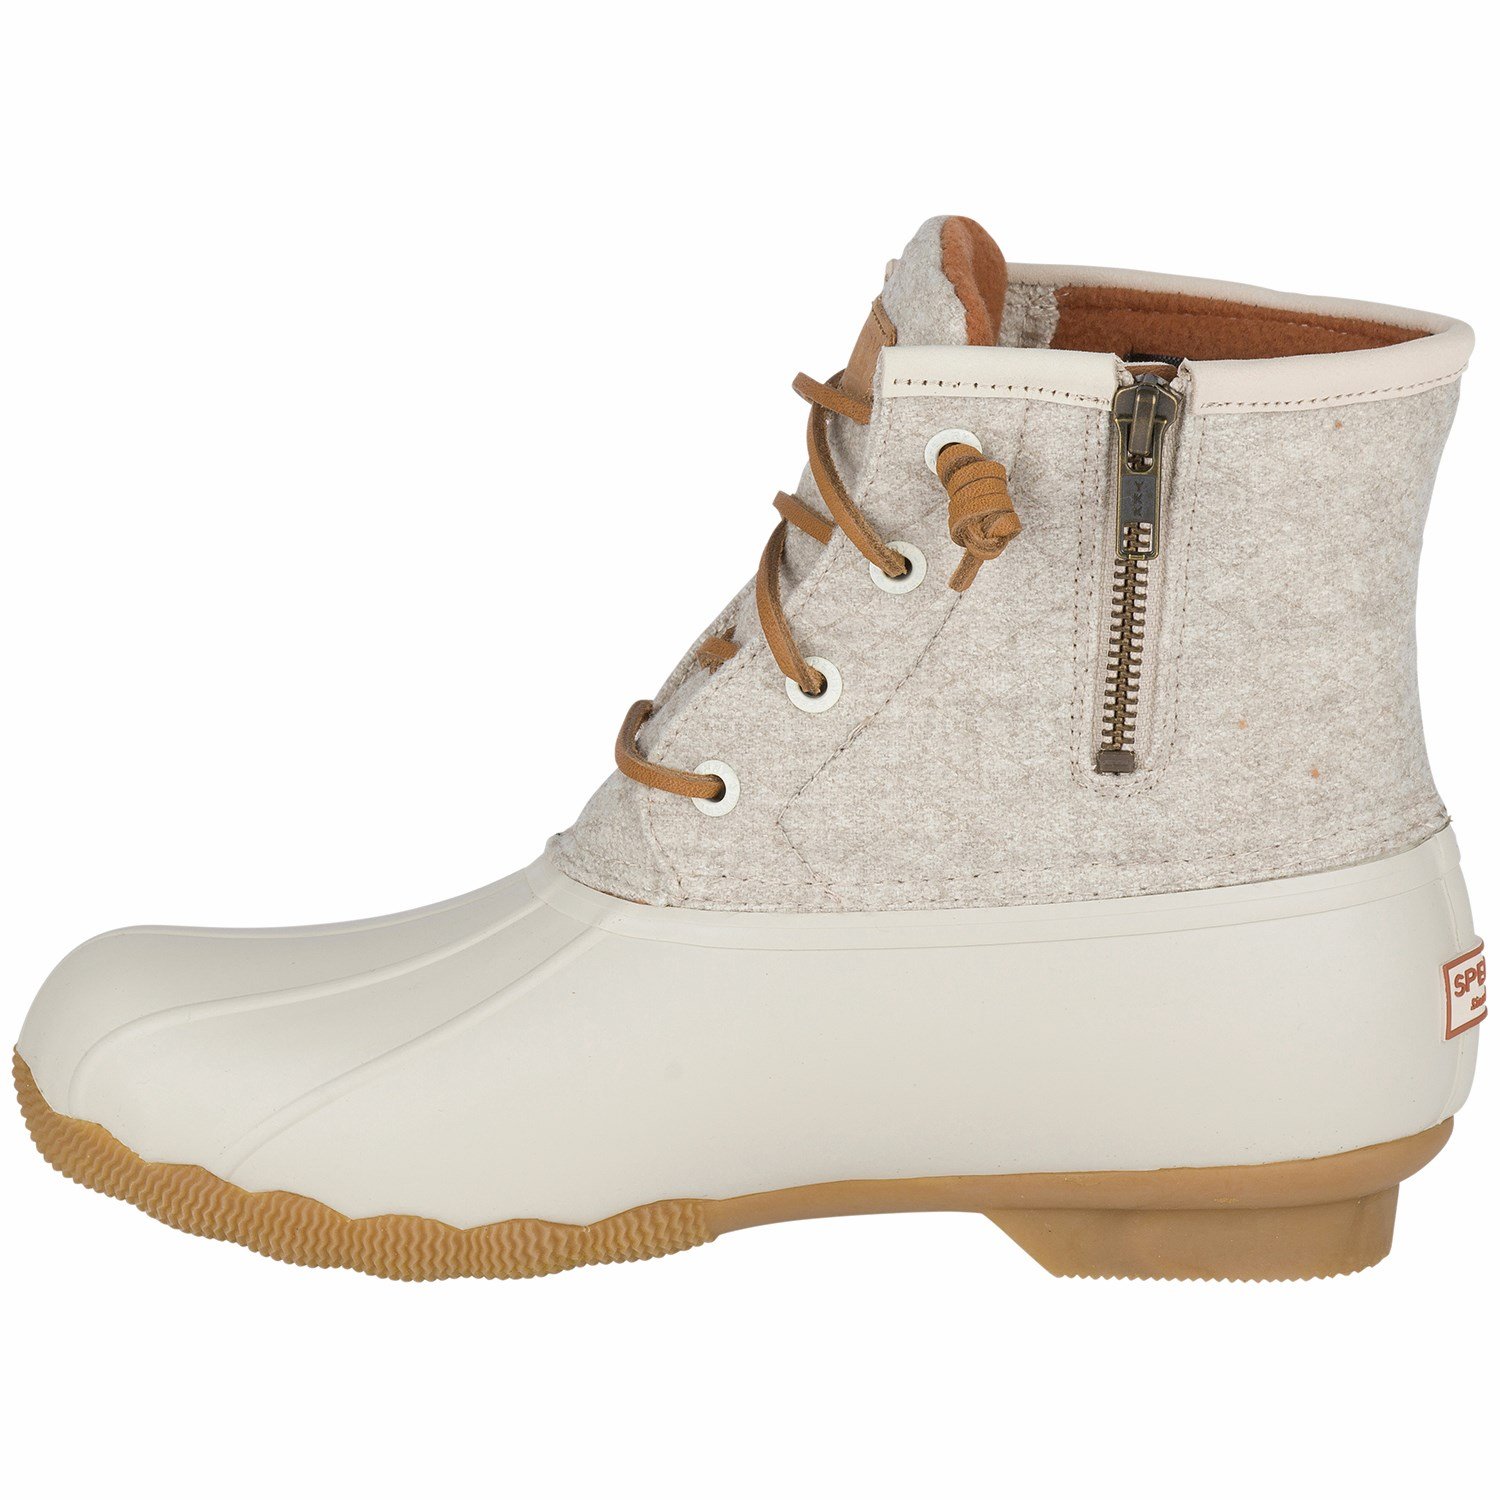 sperry rope embossed duck boots Online 